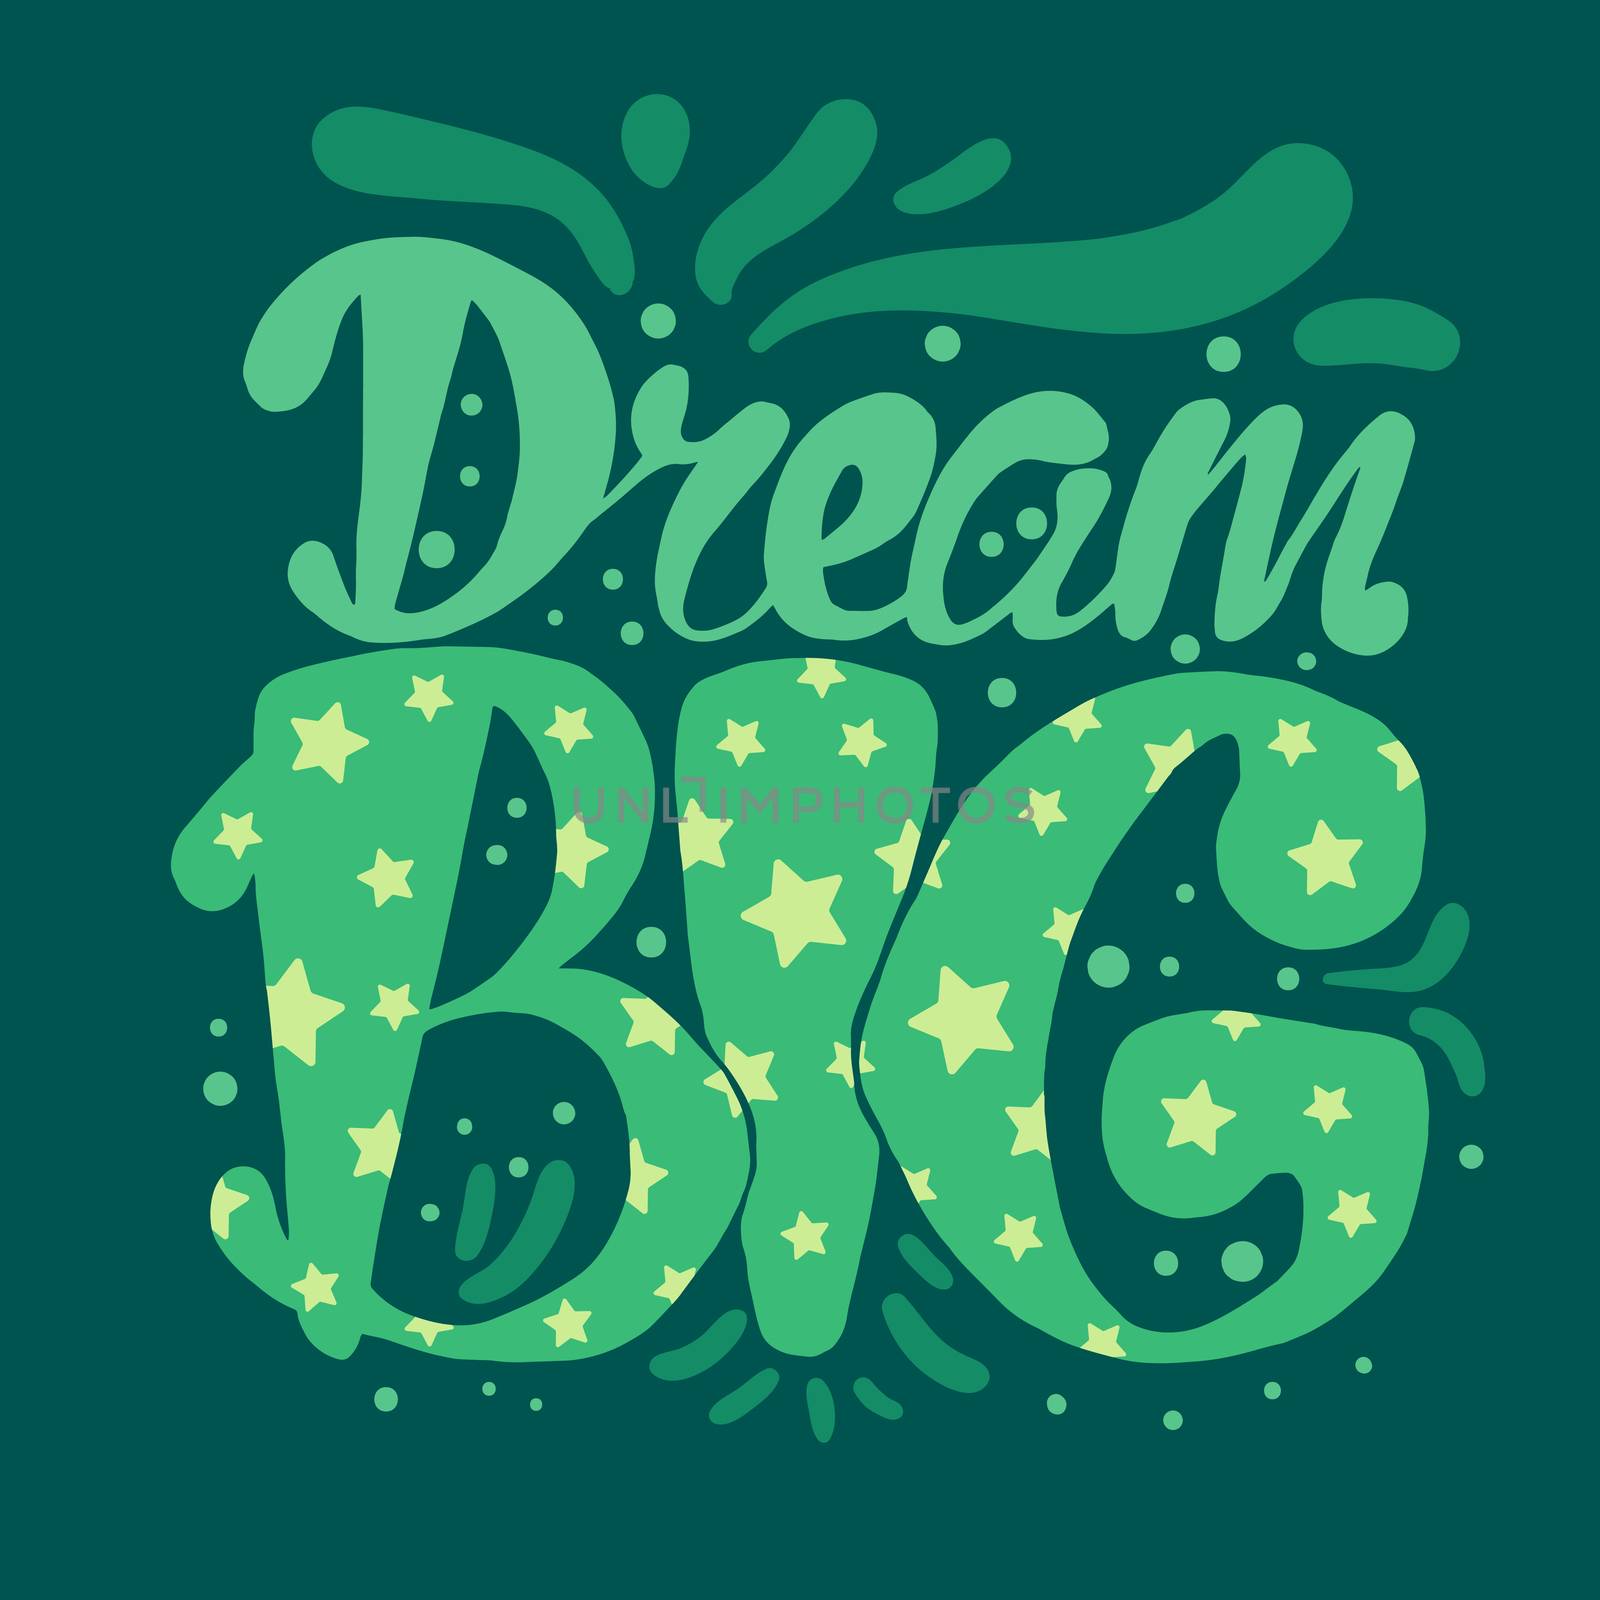 Motivation and Dream Lettering Concept by barsrsind